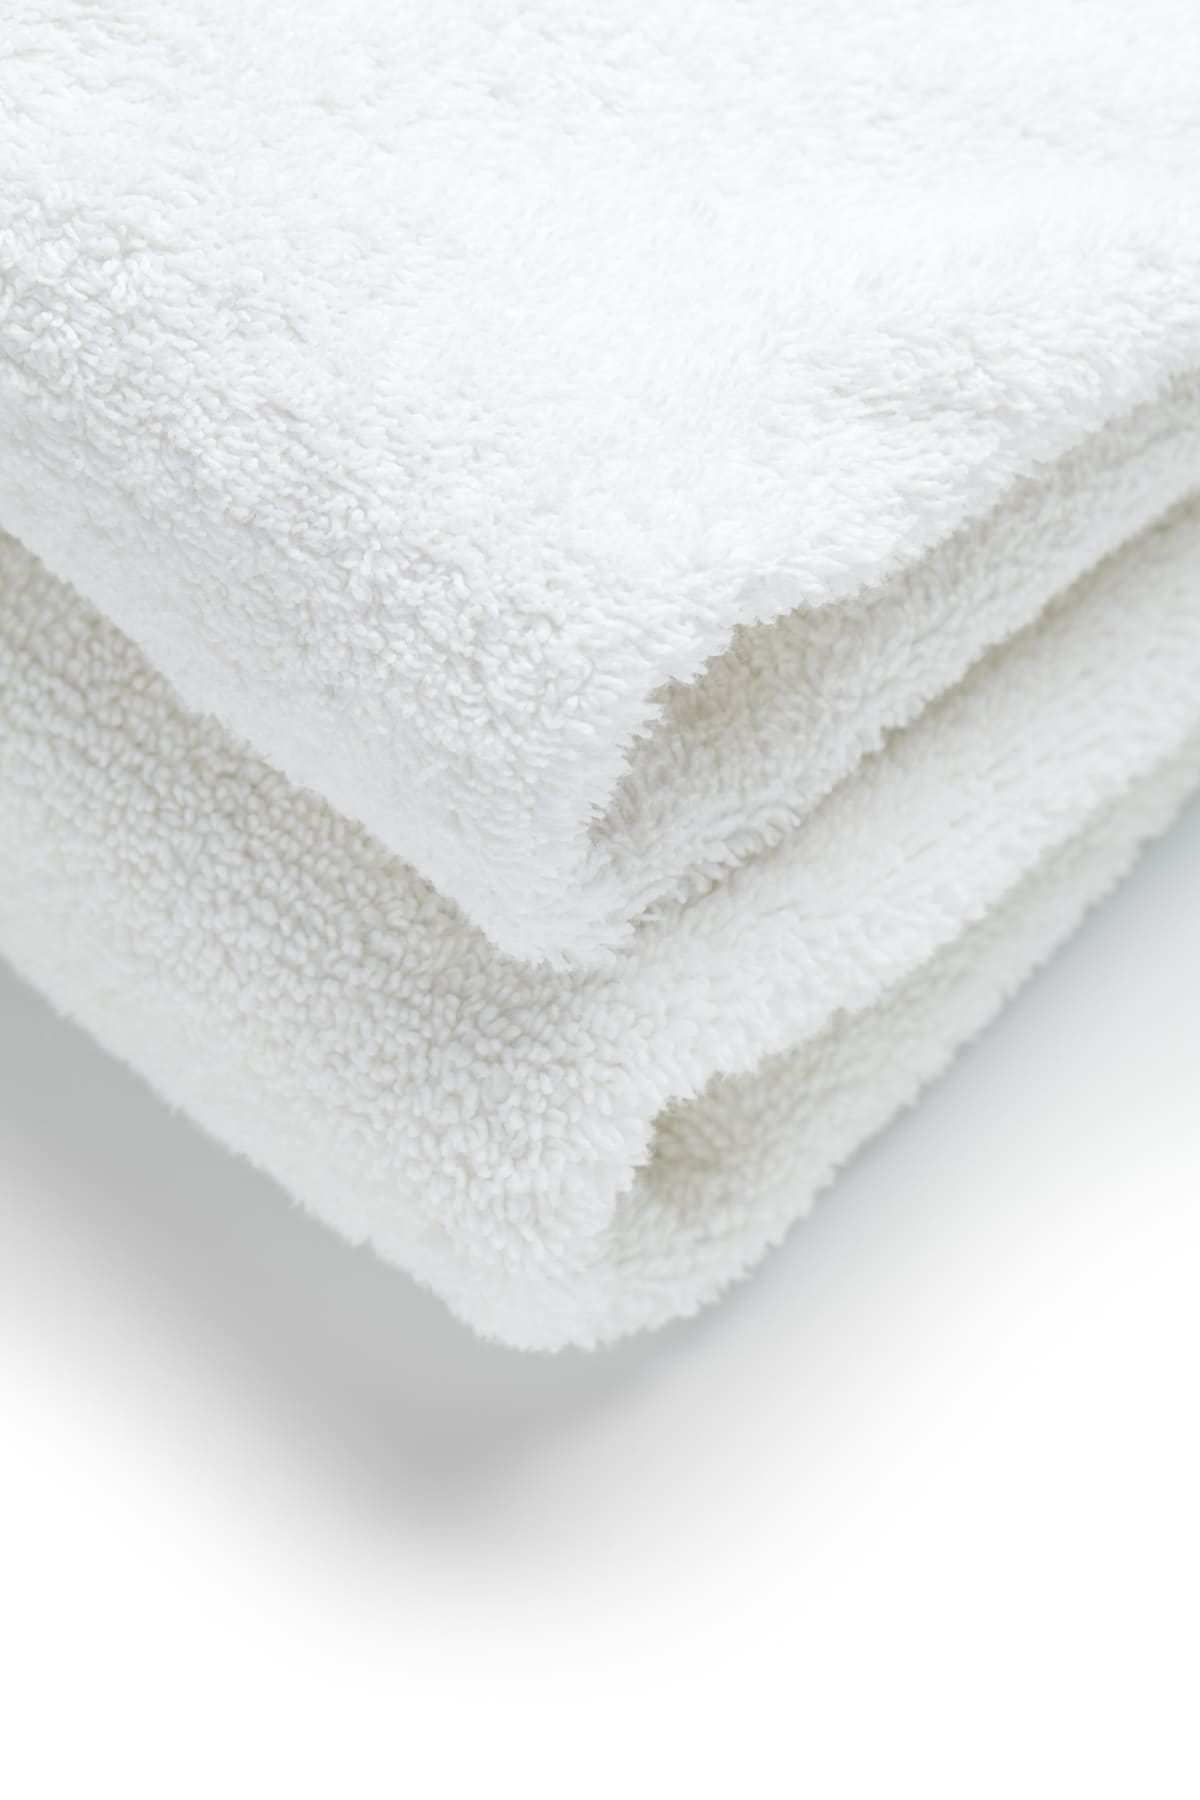 Design Experts Advise Against These Bathroom Towel Colors